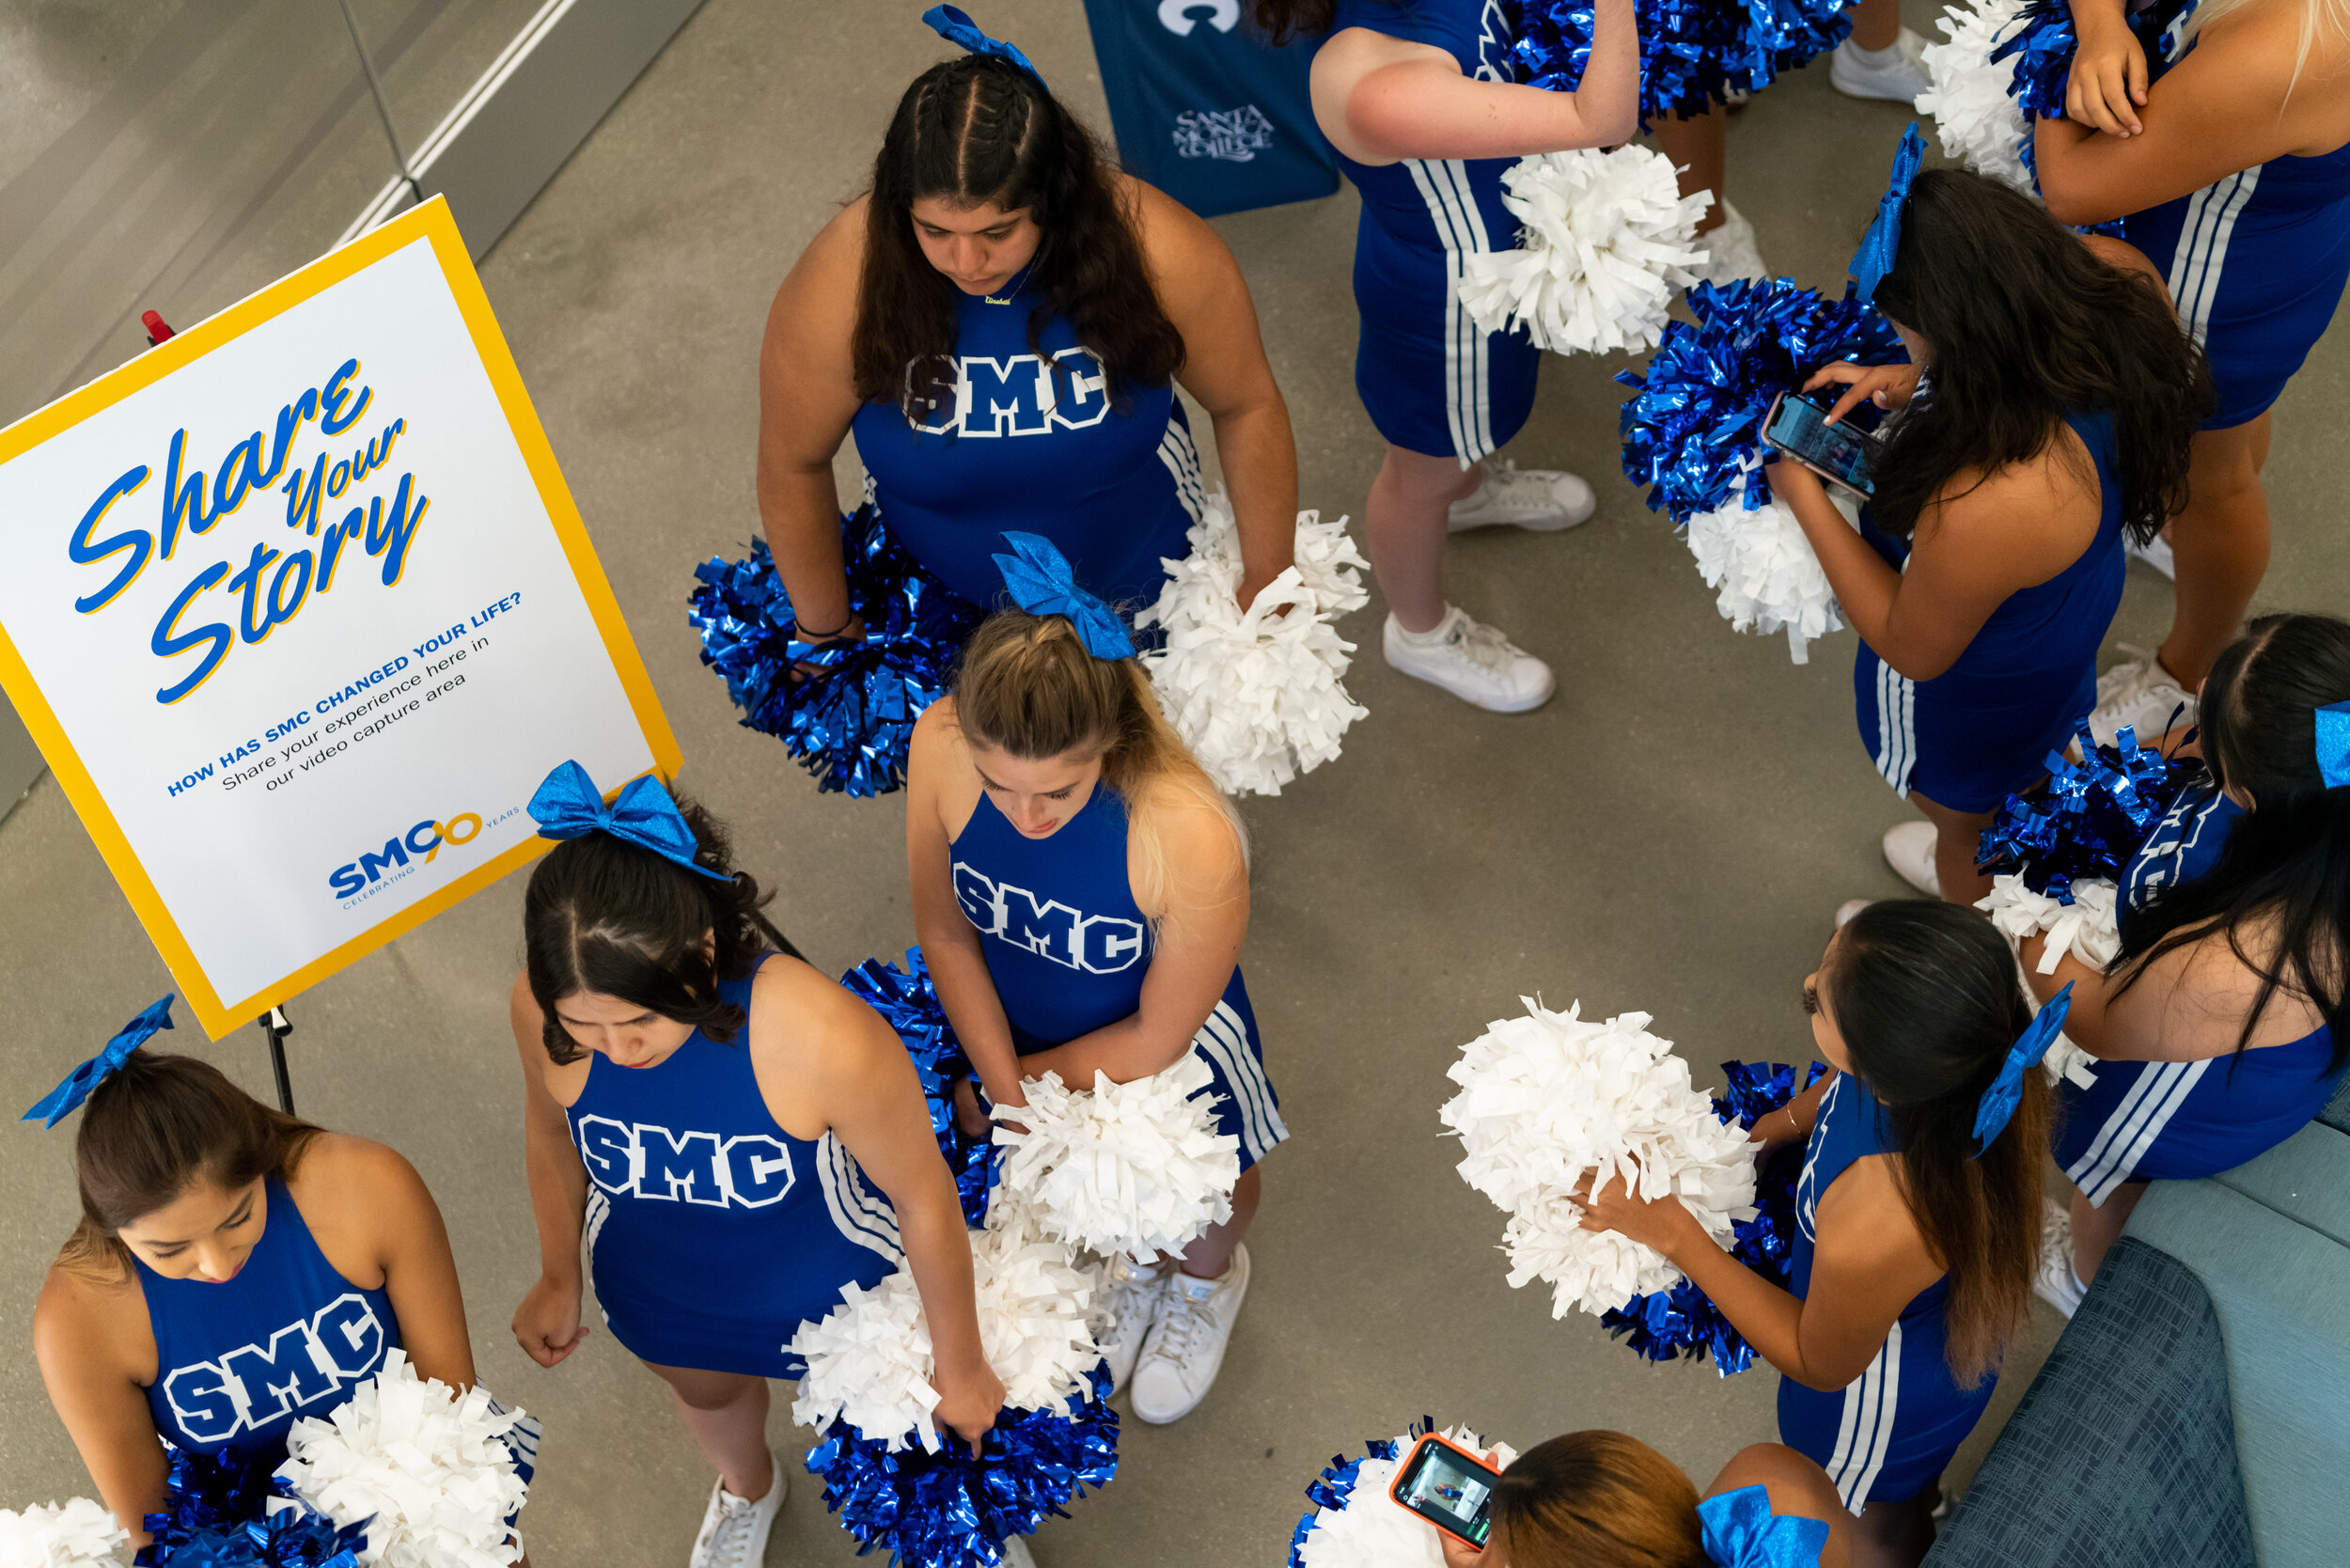  The Santa Monica College Cheer Club gets ready to perform at the the ribbon cutting ceremony  for the new Student Services Center and 90th Anniversary Celebration at the Santa Monica College main campus on October 22, 2019.  (Suzanne Steiner/The Cor